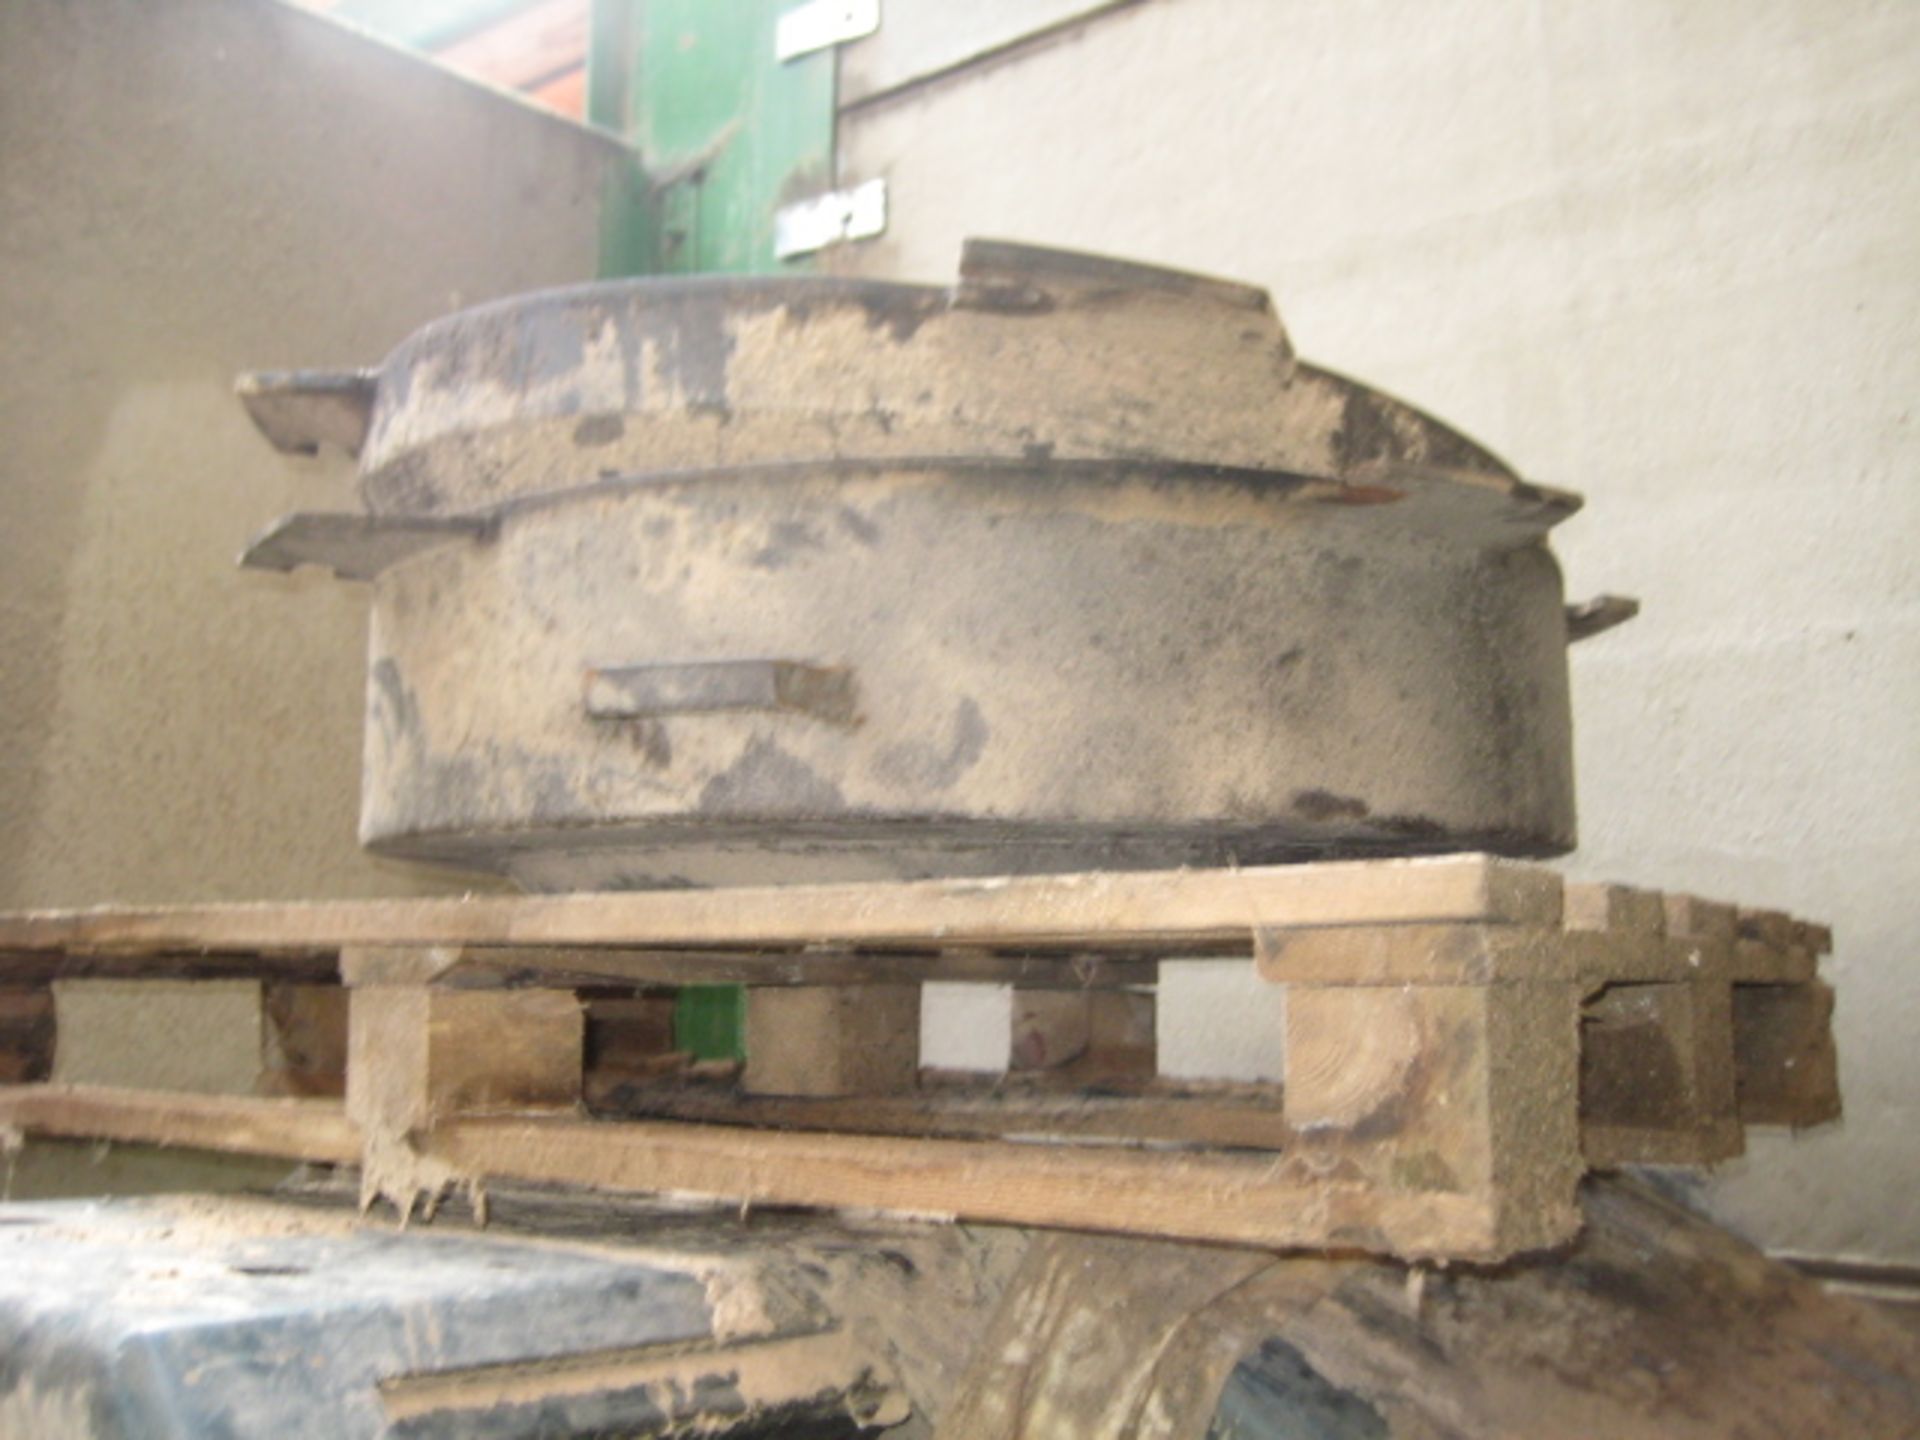 Paladin 1200WP Pellet Press Body, with internal gears and pulleys (no front work or rear equipment). - Bild 6 aus 8